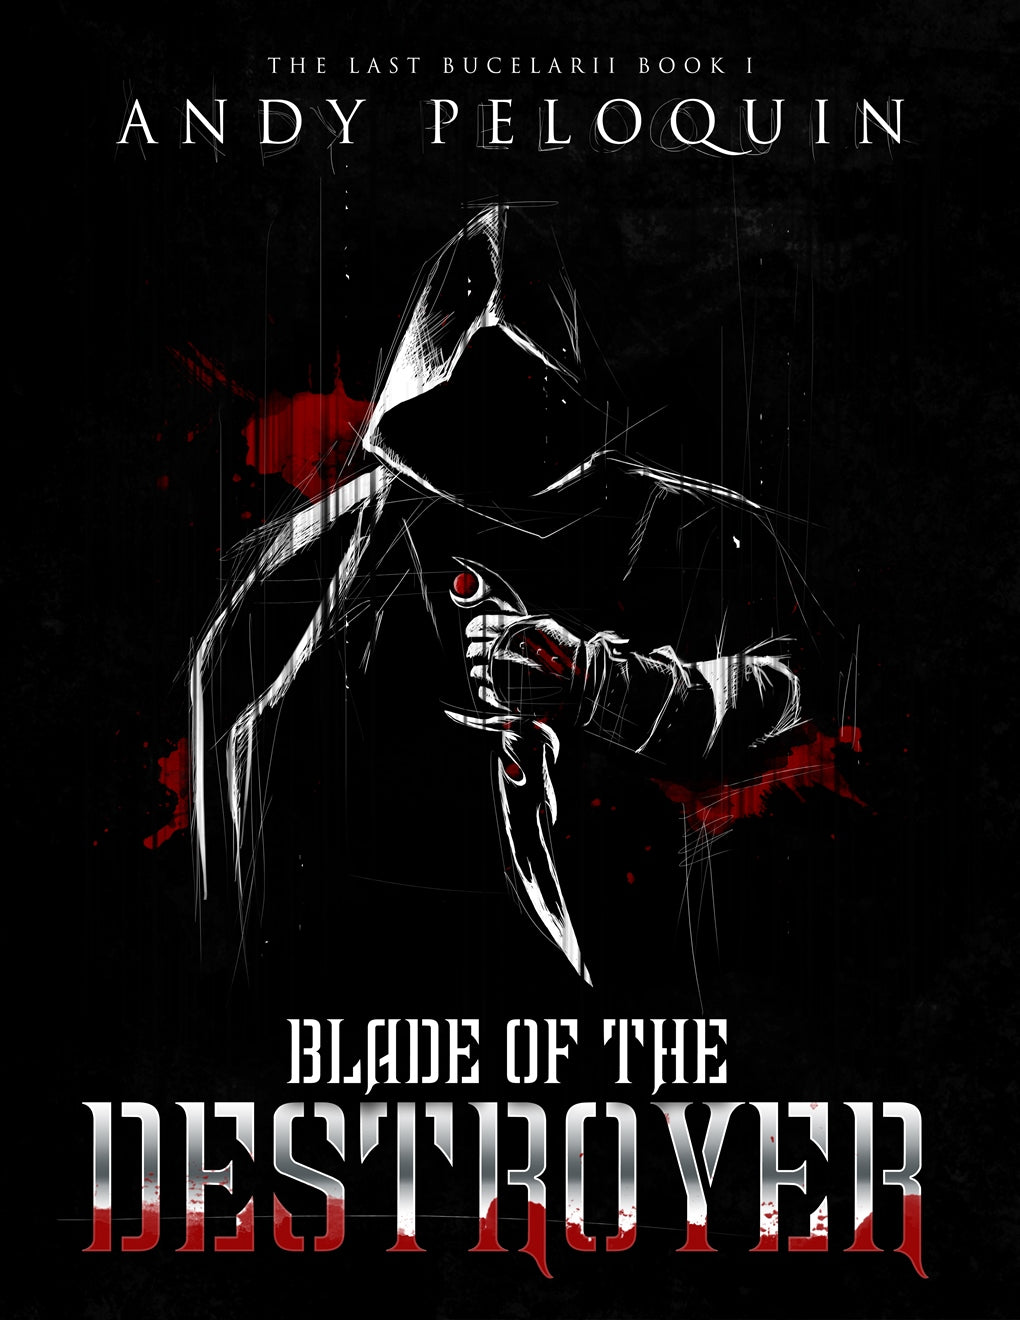 Blade of the Destroyer Blog Tour Part 1